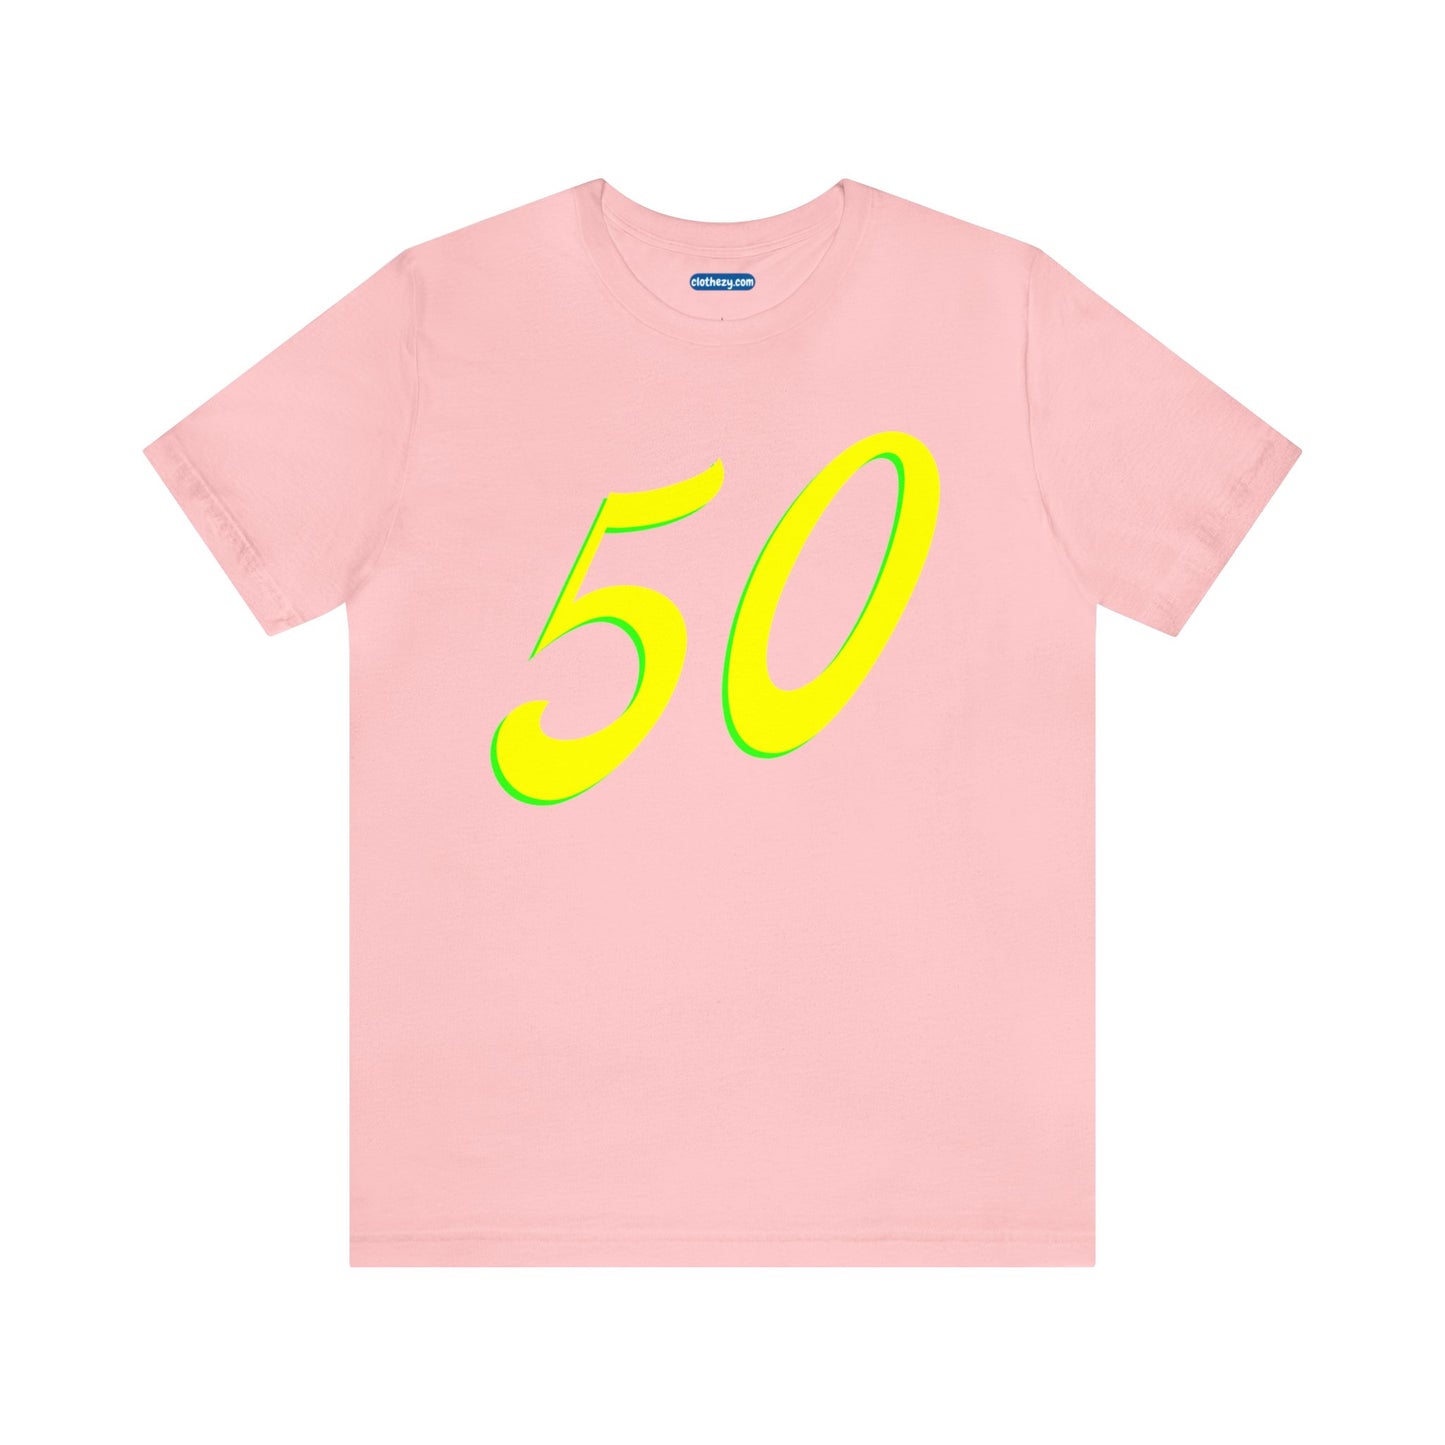 Number 50 Design - Soft Cotton Tee for birthdays and celebrations, Gift for friends and family, Multiple Options by clothezy.com in Pink Size Small - Buy Now